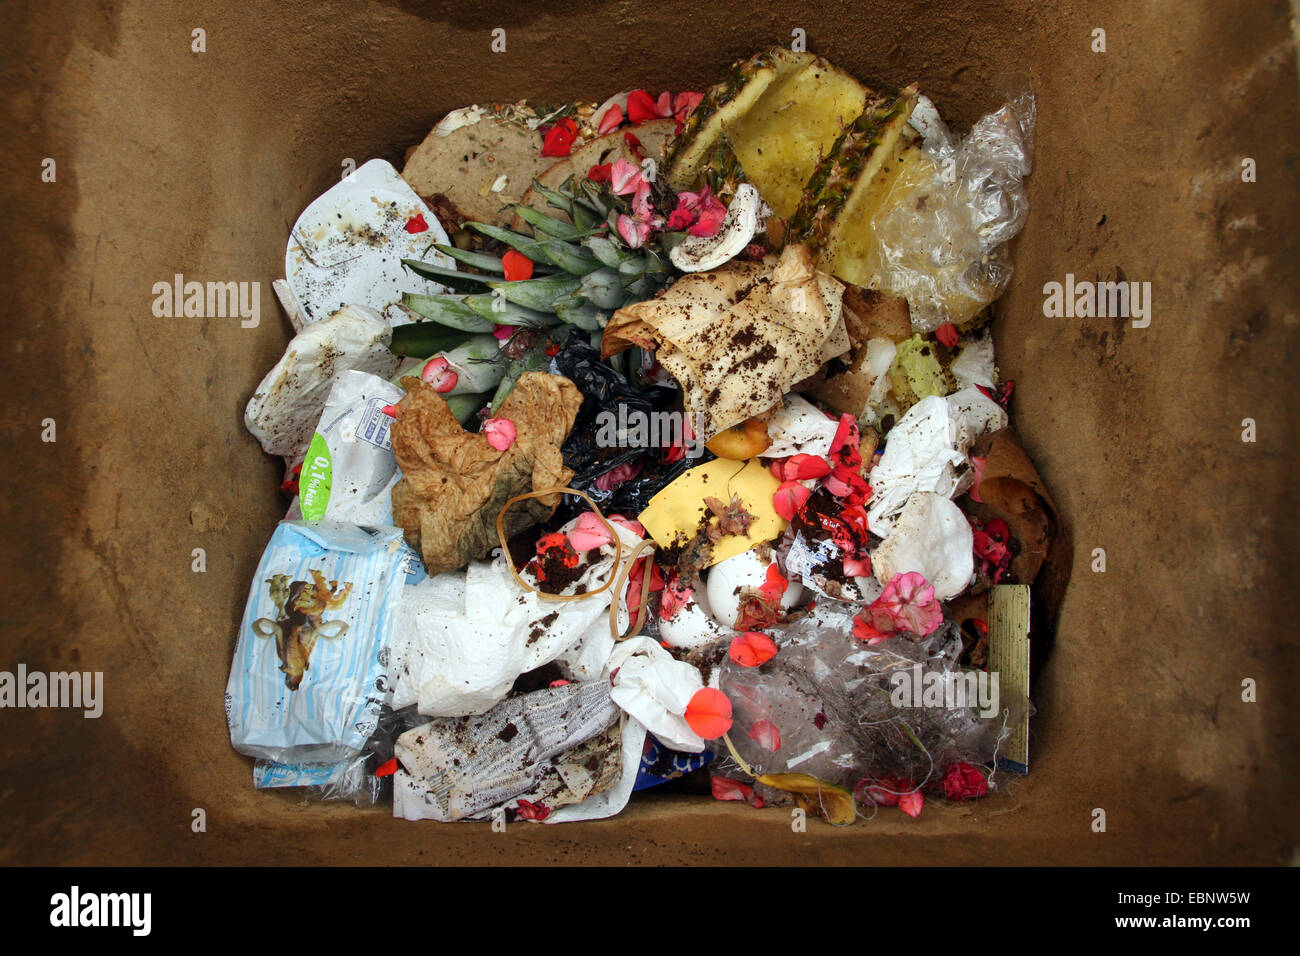 view into a waste container for residual waste, Germany Stock Photo